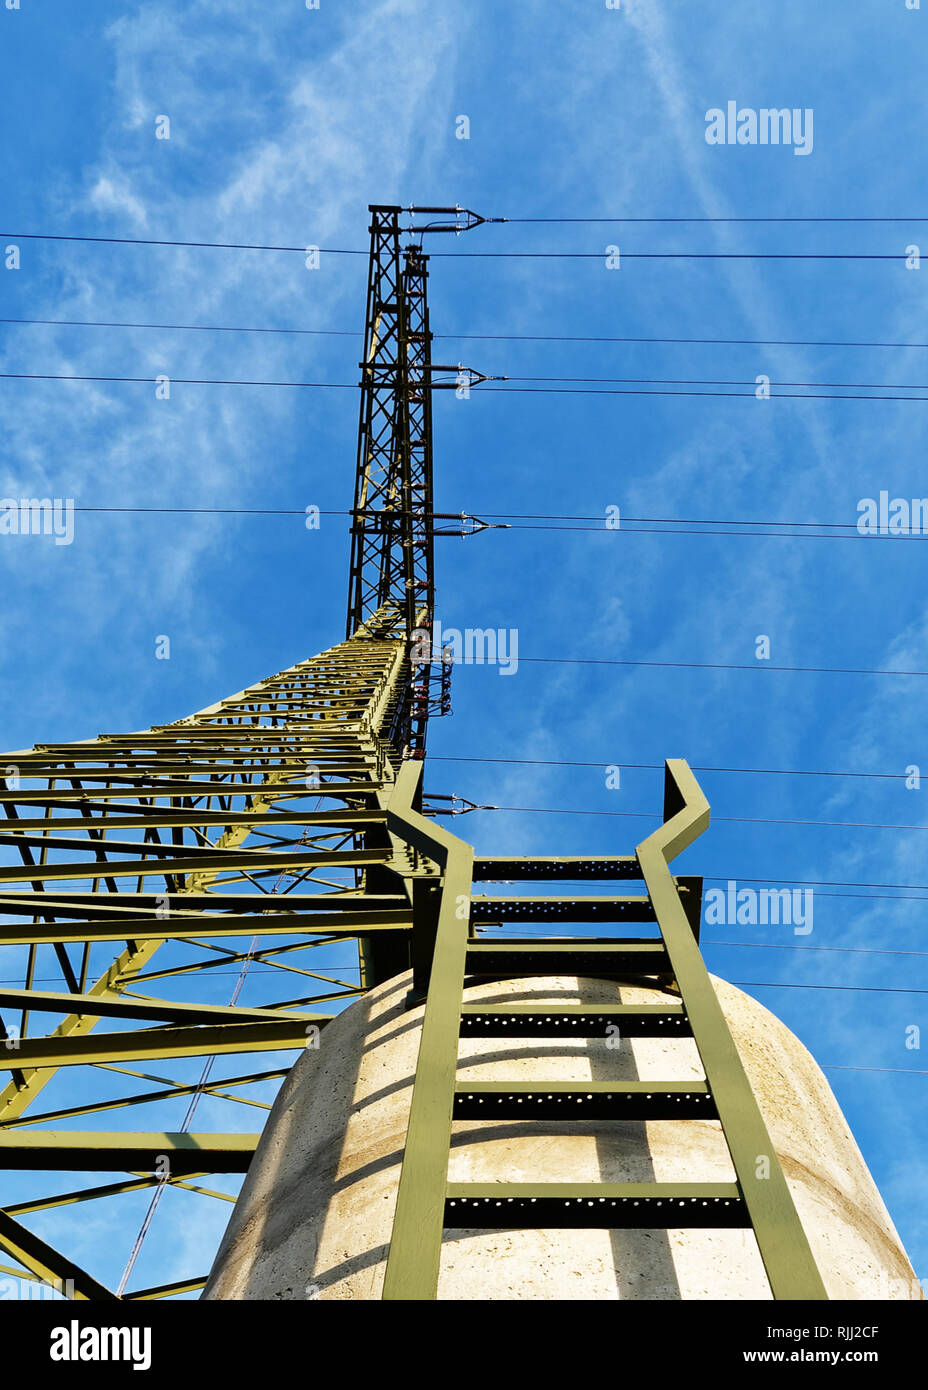 View from below up to a high voltage pylon, which stands on a concrete foundation, a ladder leads up. Above it a blue sky with light clouds of fog. Stock Photo